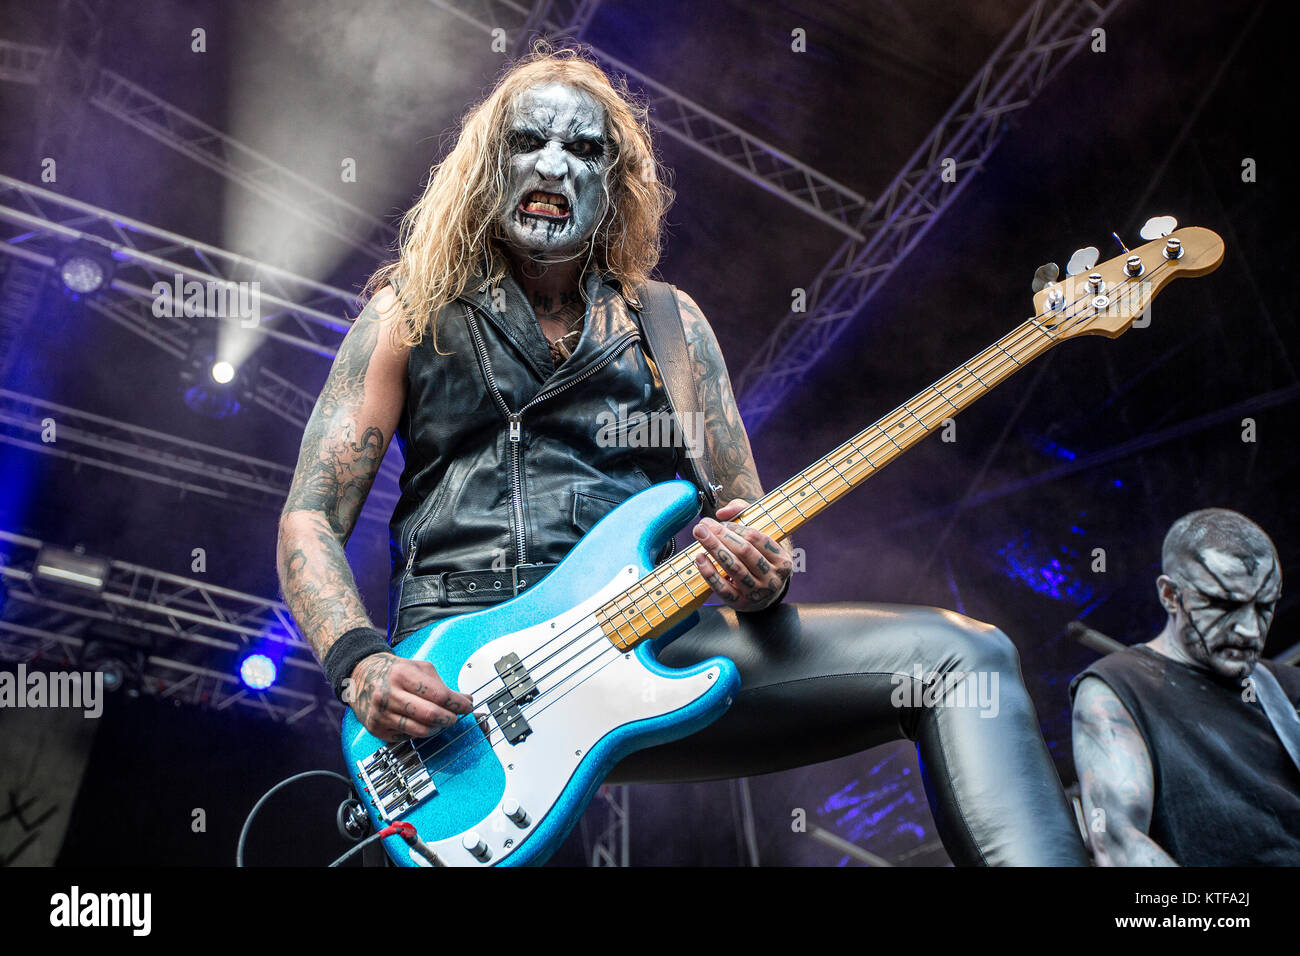 Norway, Borre – August 18, 2017. The Norwegian black metal band Gaahls Wyrd performs a live concert during the Norwegian metal festival Midgardsblot Festival 2017 in Borre. Here here bass player Frode Kilvik aka Eld is seen live on stage. (Photocredit: Terje Dokken). Stock Photo